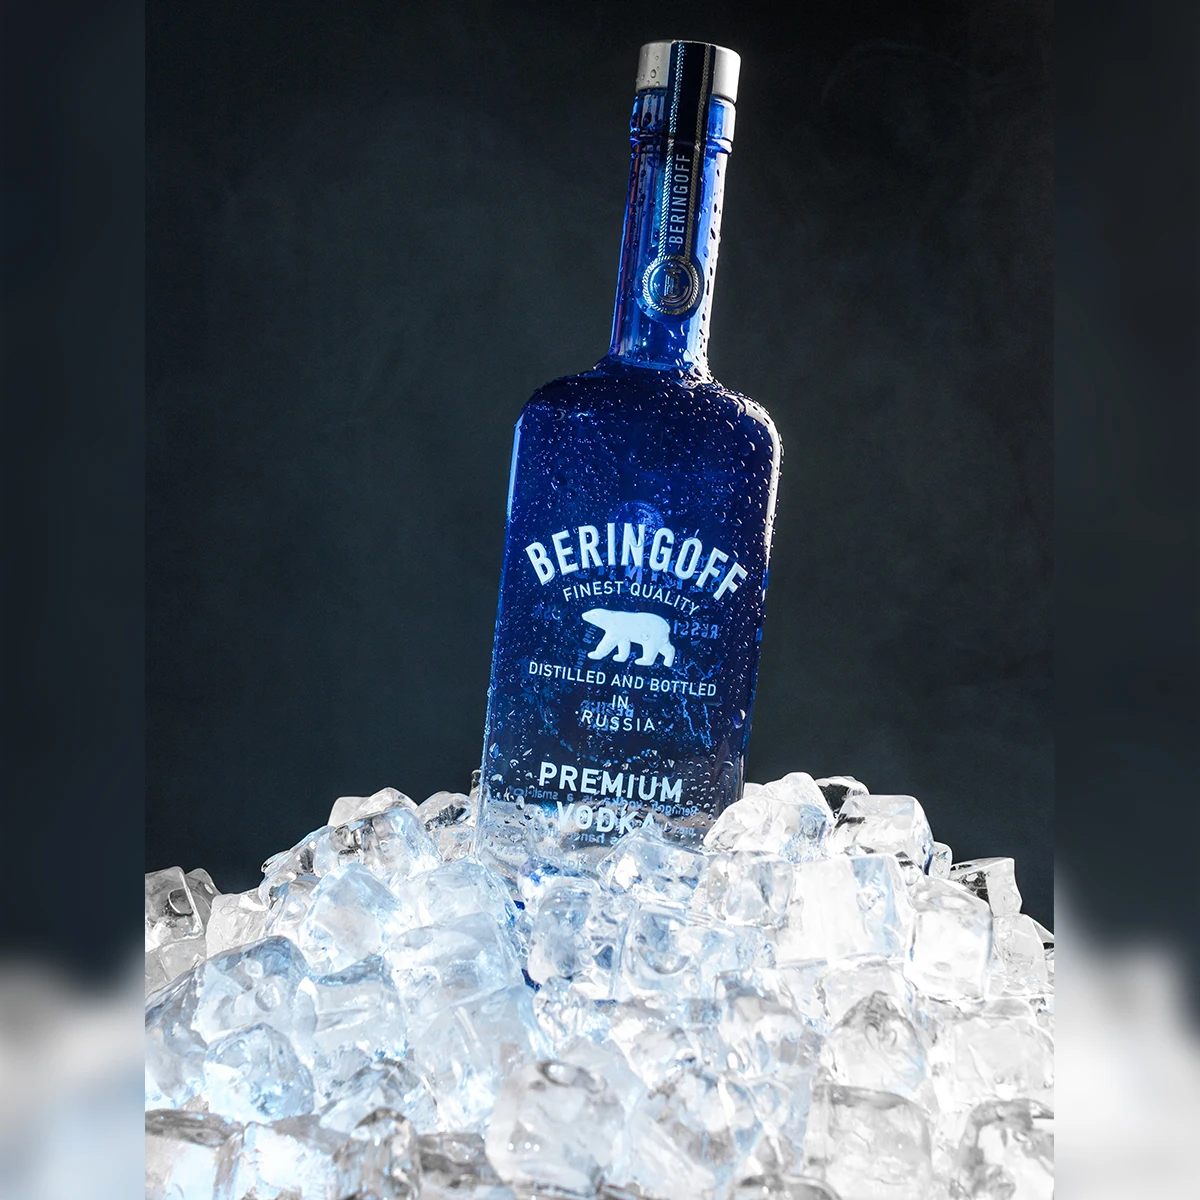 100 % Natural ingredients 750 ml 40% certified silver and charcoal filtered Beringoff premium vodka in glass bottle for drinking